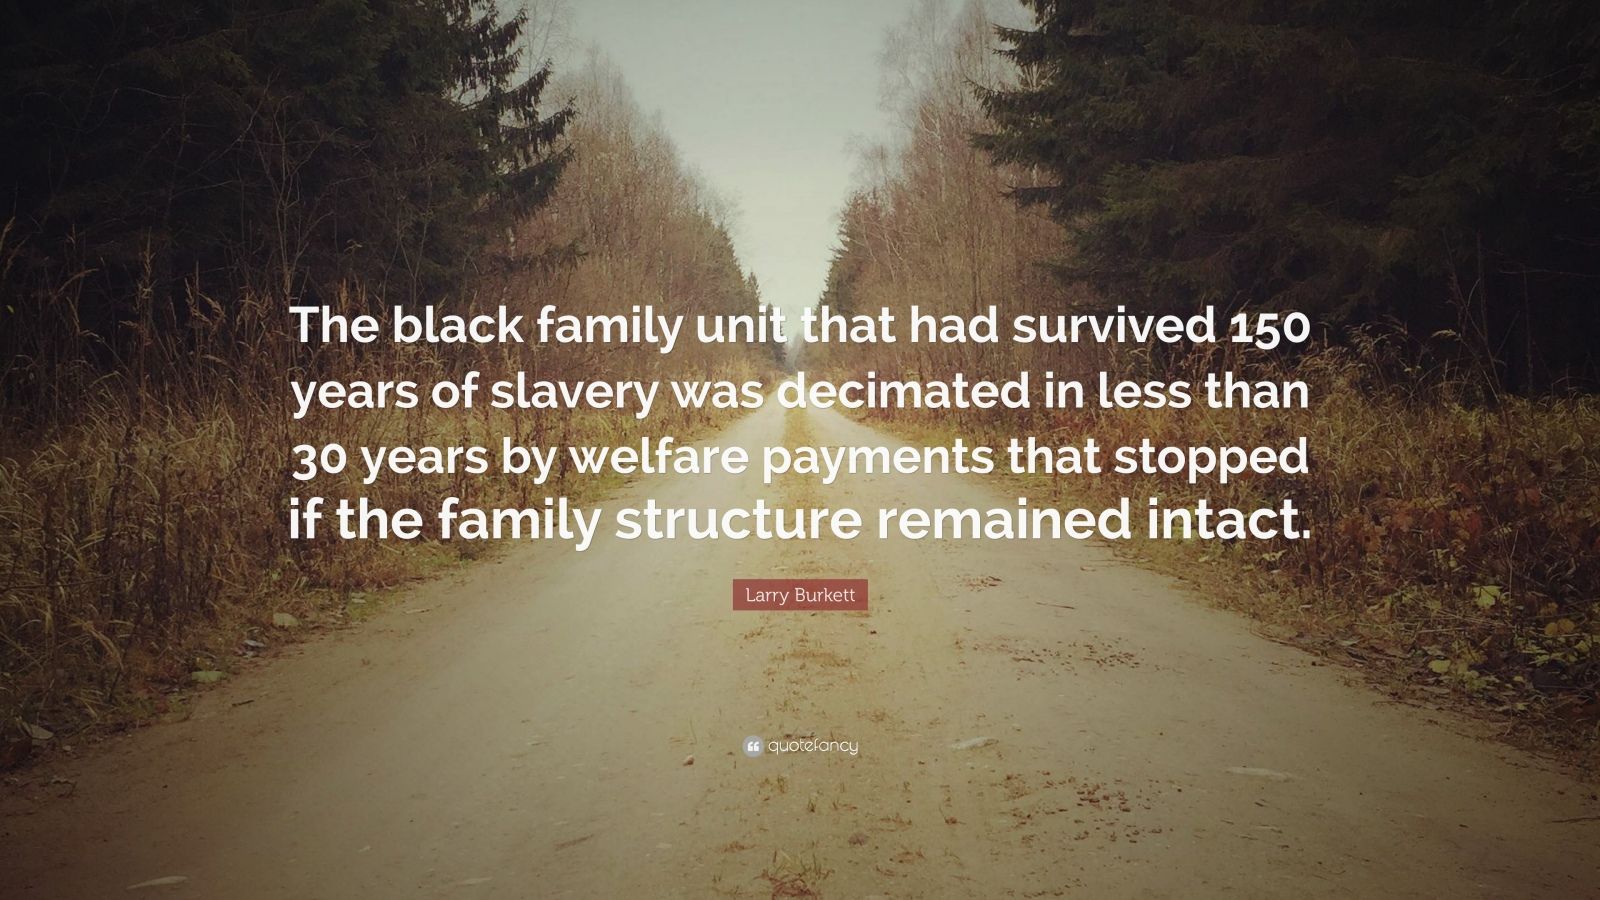 Larry Burkett Quote: “The black family unit that had survived 150 years